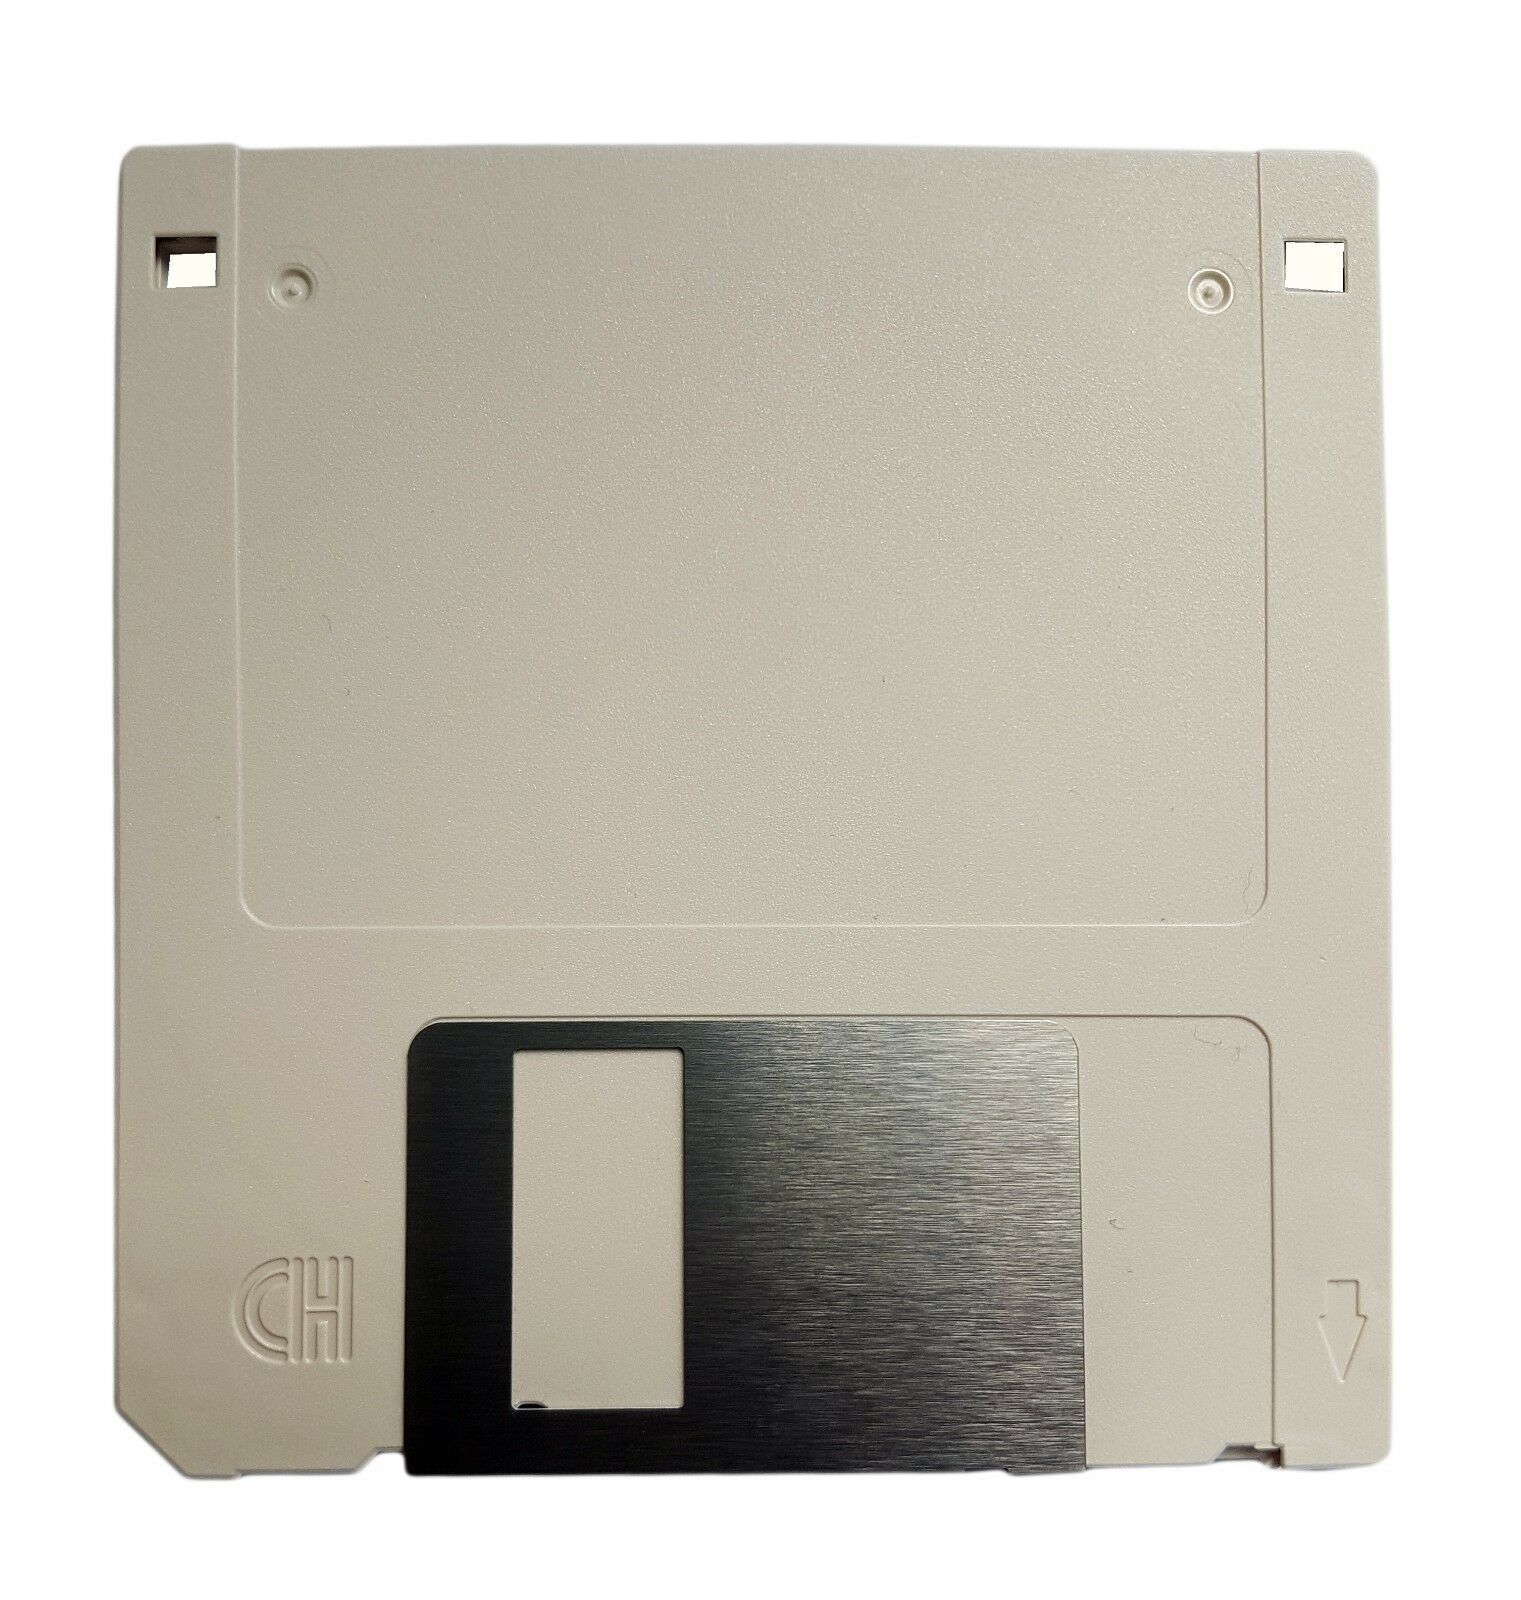 how to format 2hd floppy disk to 2dd